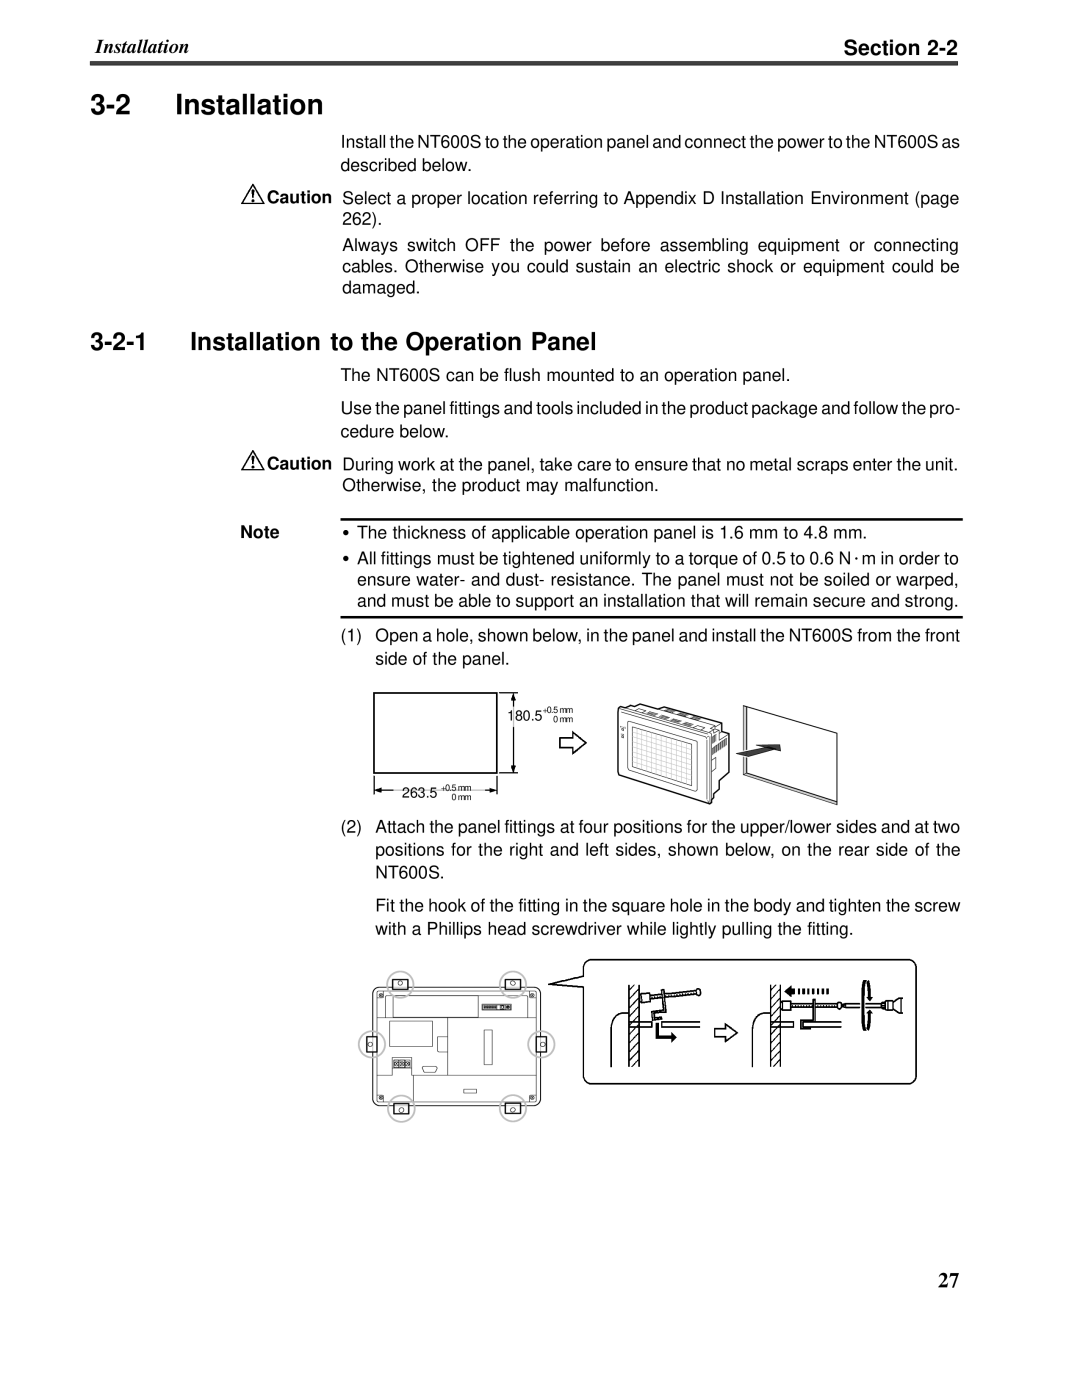 Omron V022-E3-1 operation manual 3-2Installation, 3-2-1Installation to the Operation Panel, Section 